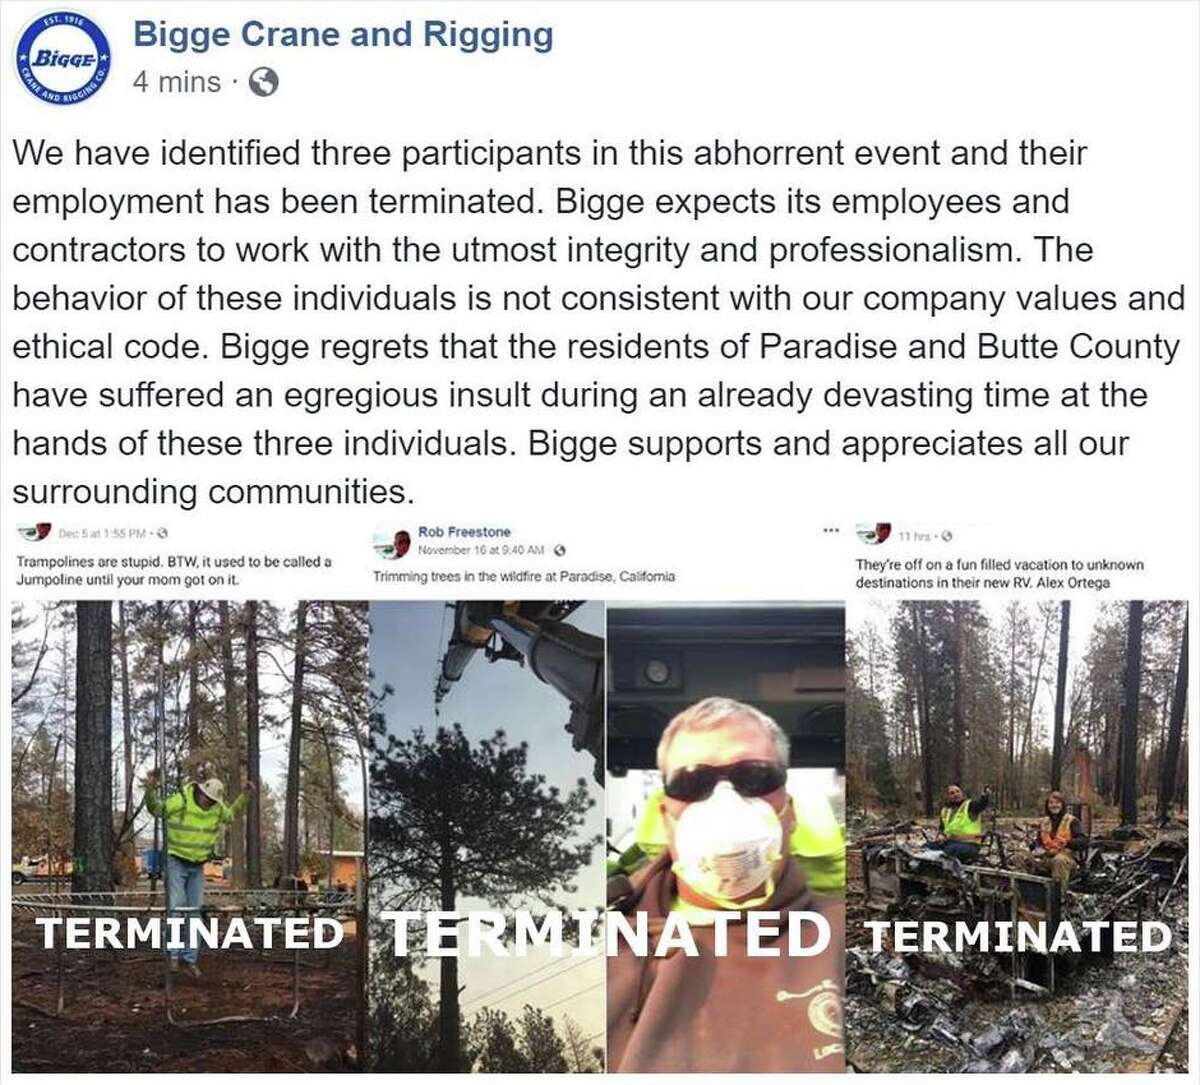 A Bay Area construction company has fired three of its cleanup workers after photos of them posing insensitively on the Camp Fire debris surfaced online.